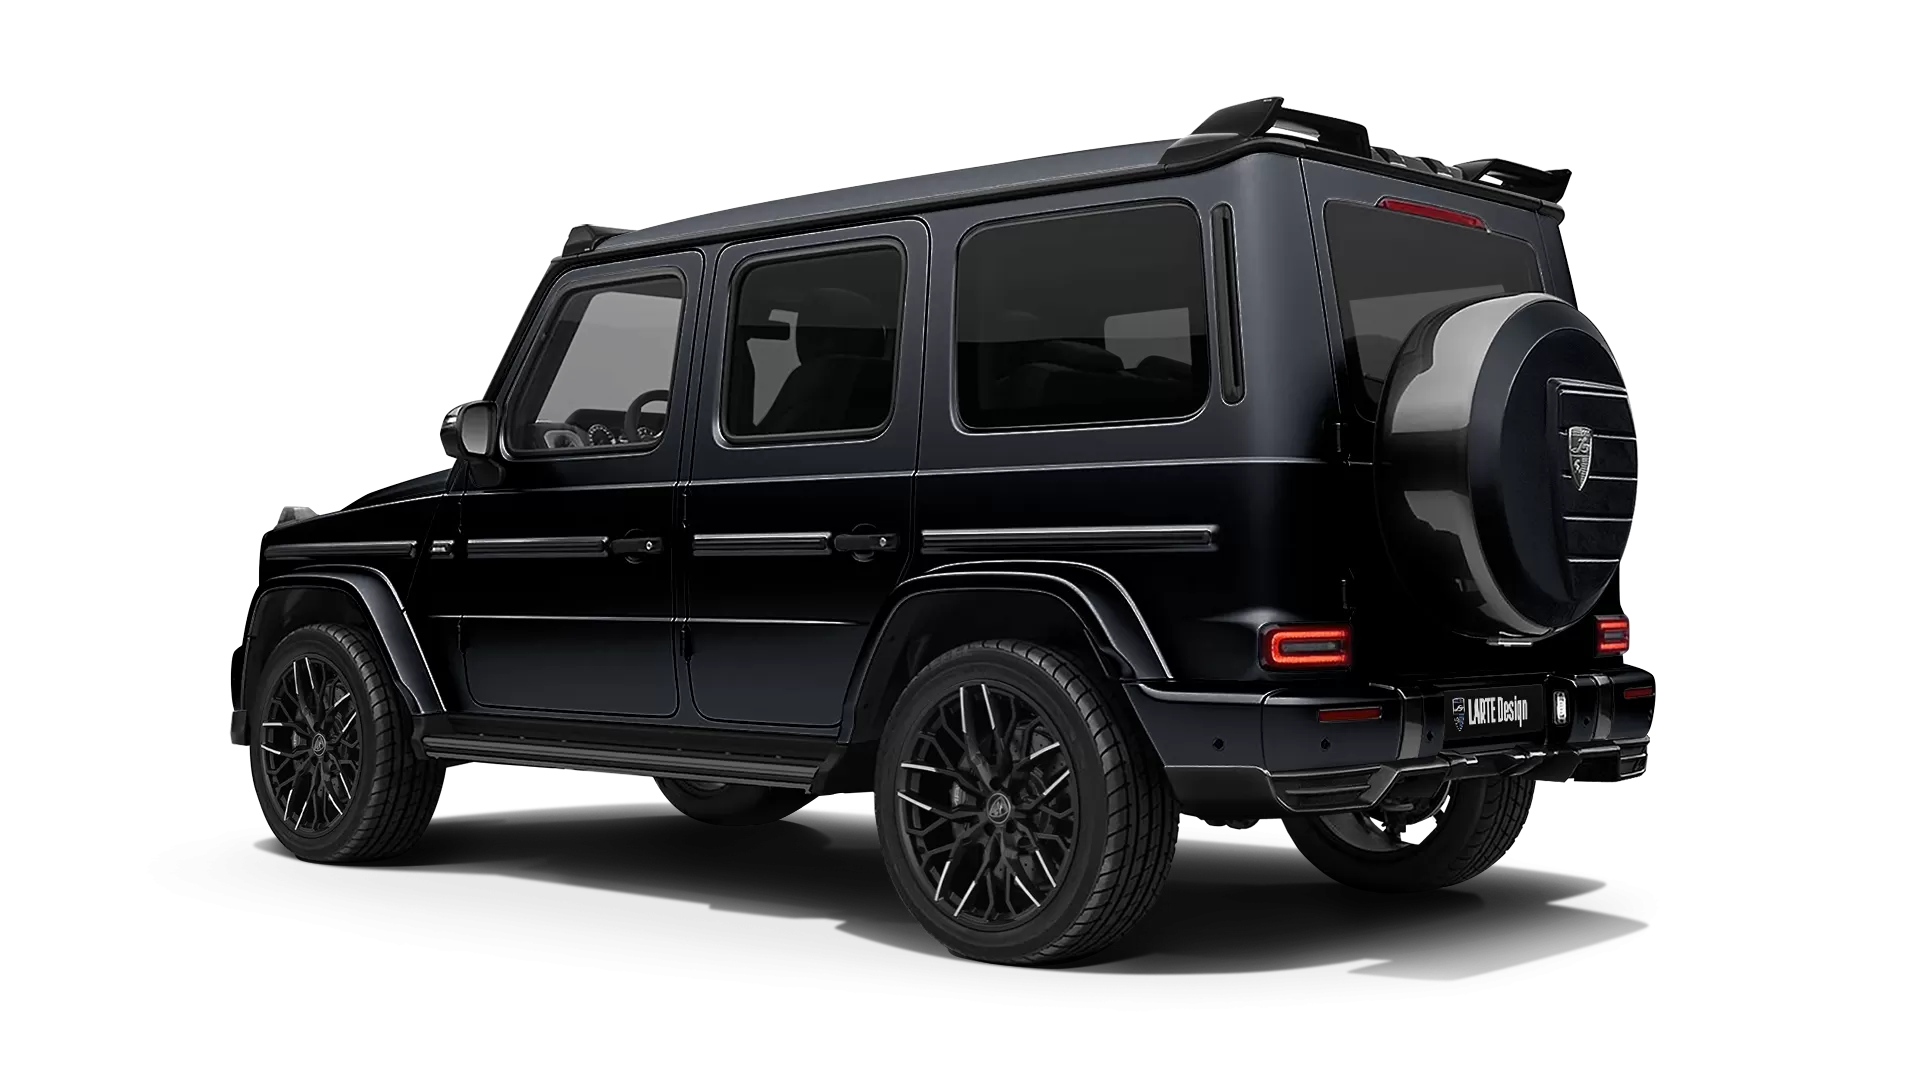 Mercedes G class W463 with painted body kit: rear view shown in Night Black